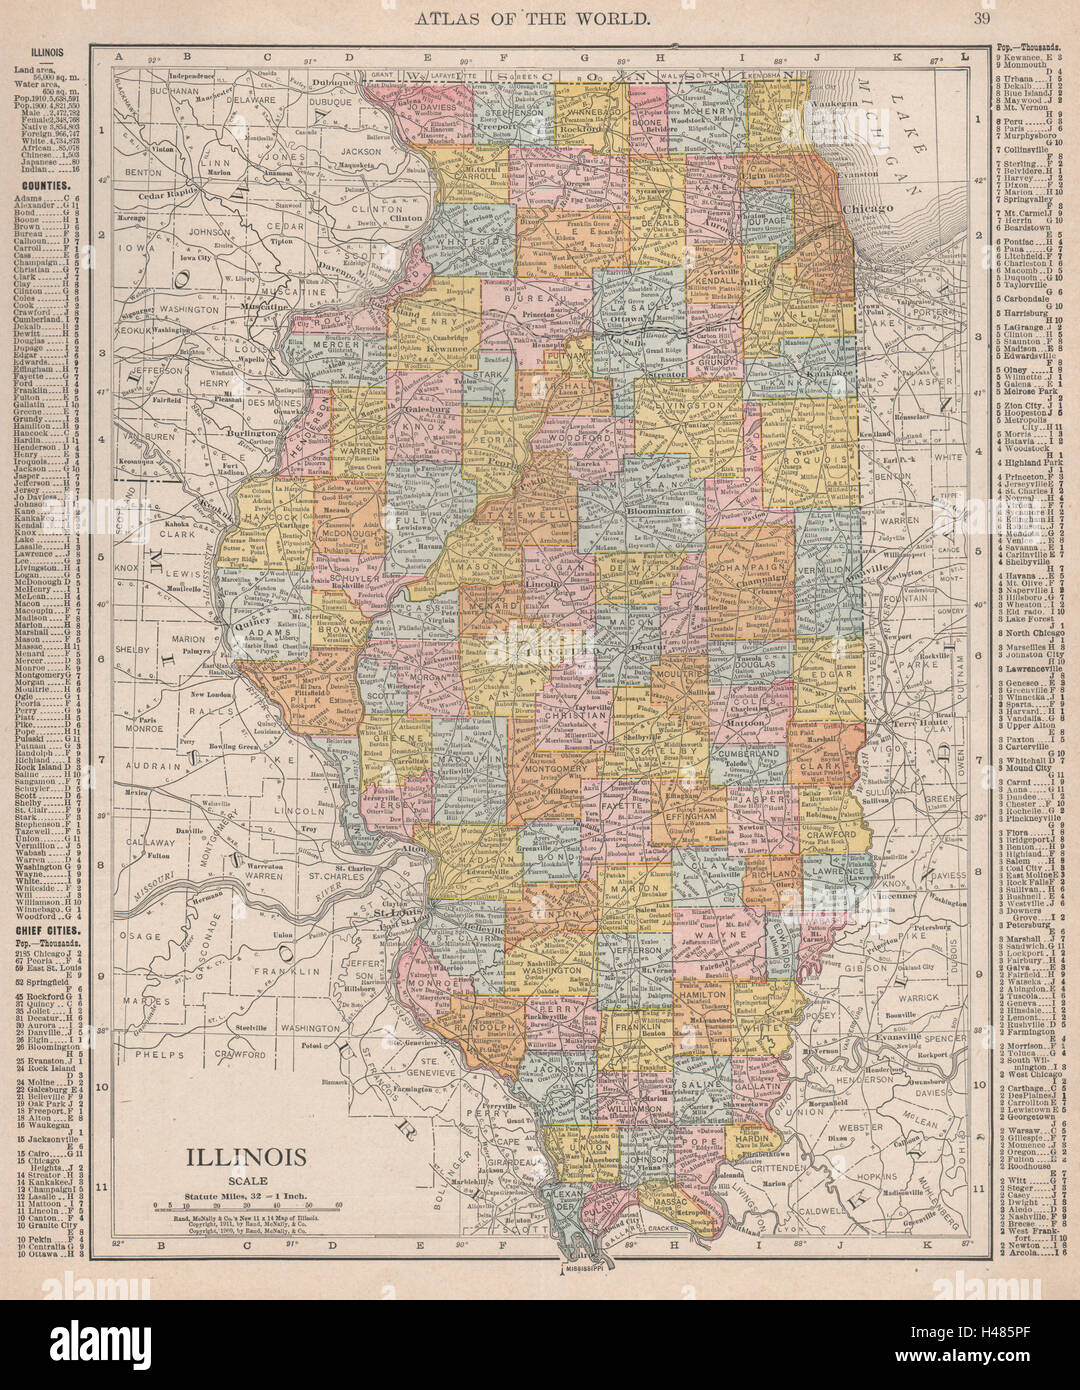 Illinois state map showing counties. RAND MCNALLY 1912 old antique chart Stock Photo